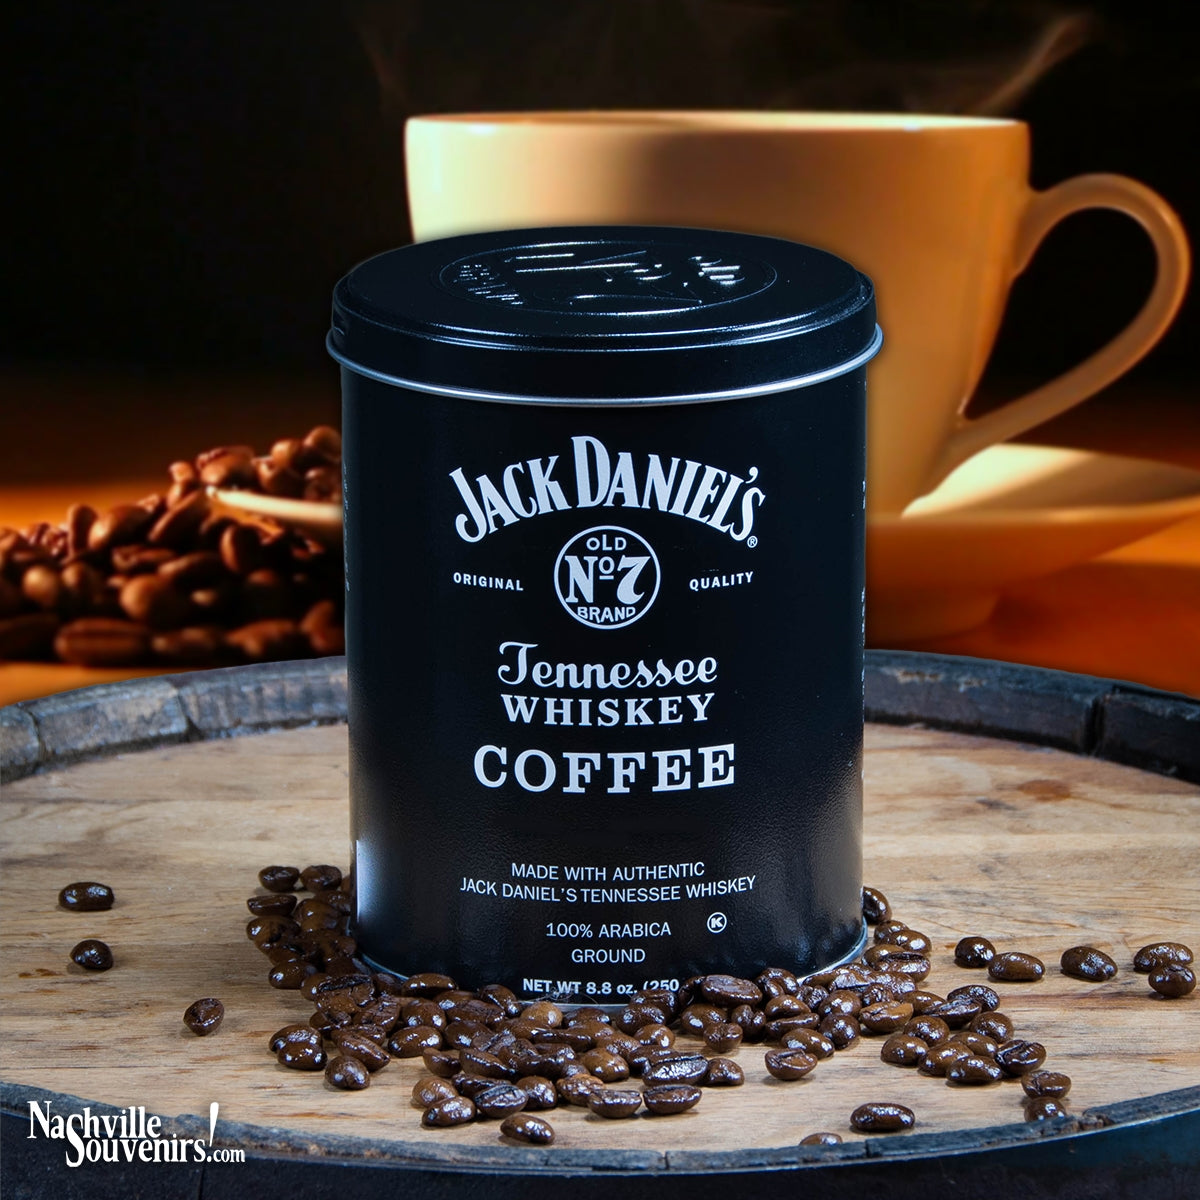 Wake up each day to this wonderful blend of Jack Daniel's coffee. The smell alone makes a great way to kick start your day.  This delicious gourmet brew is made from 100% arabica beans that are ground and infused with real Jack Daniel's Tennessee whiskey from Lynchburg, Tennessee.